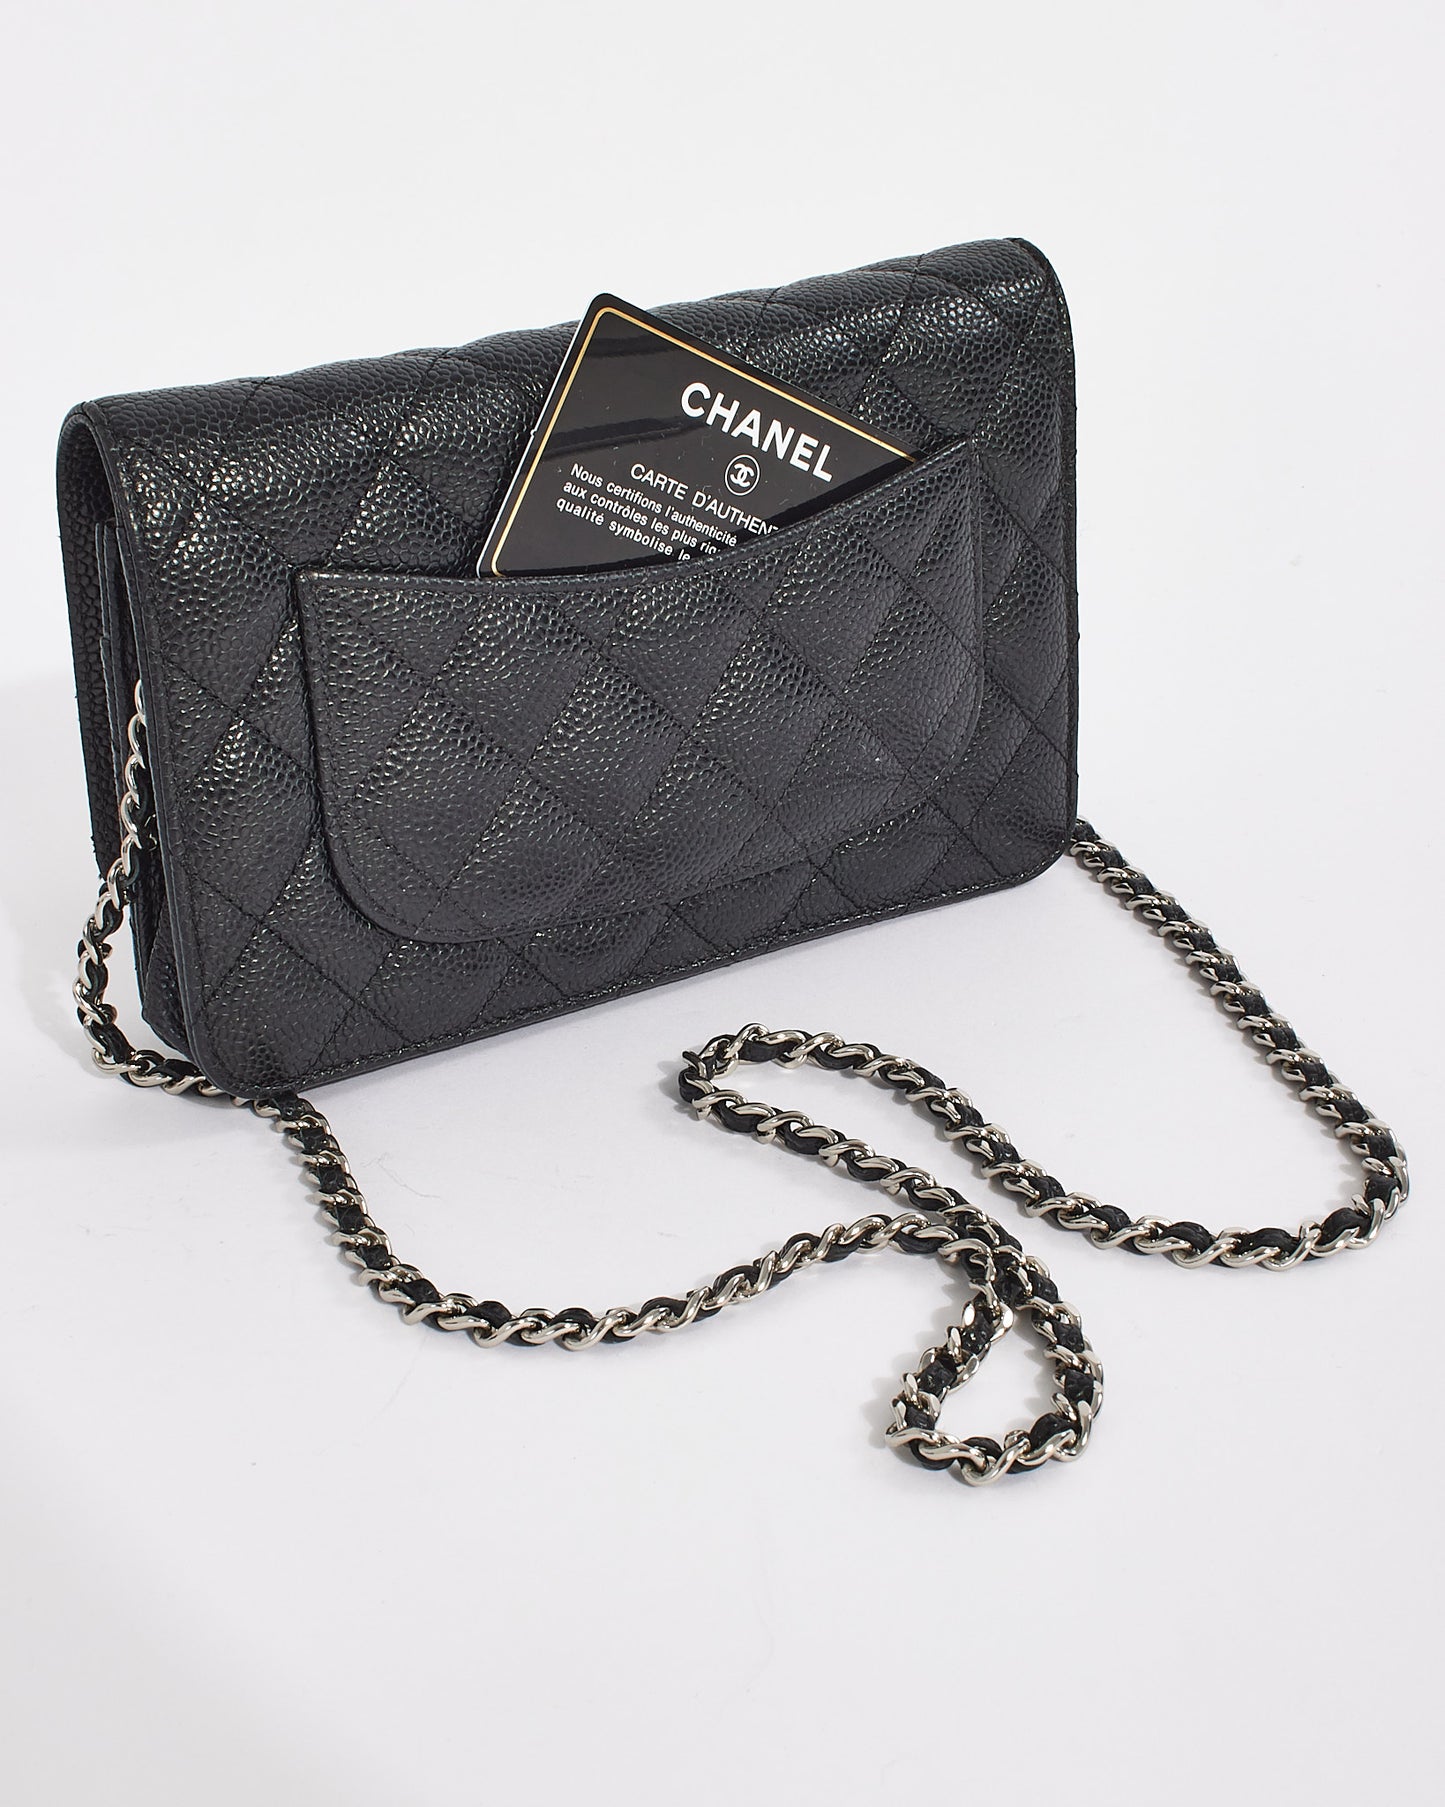 Chanel Black Caviar Leather Quilted Wallet on Chain Bag SHW